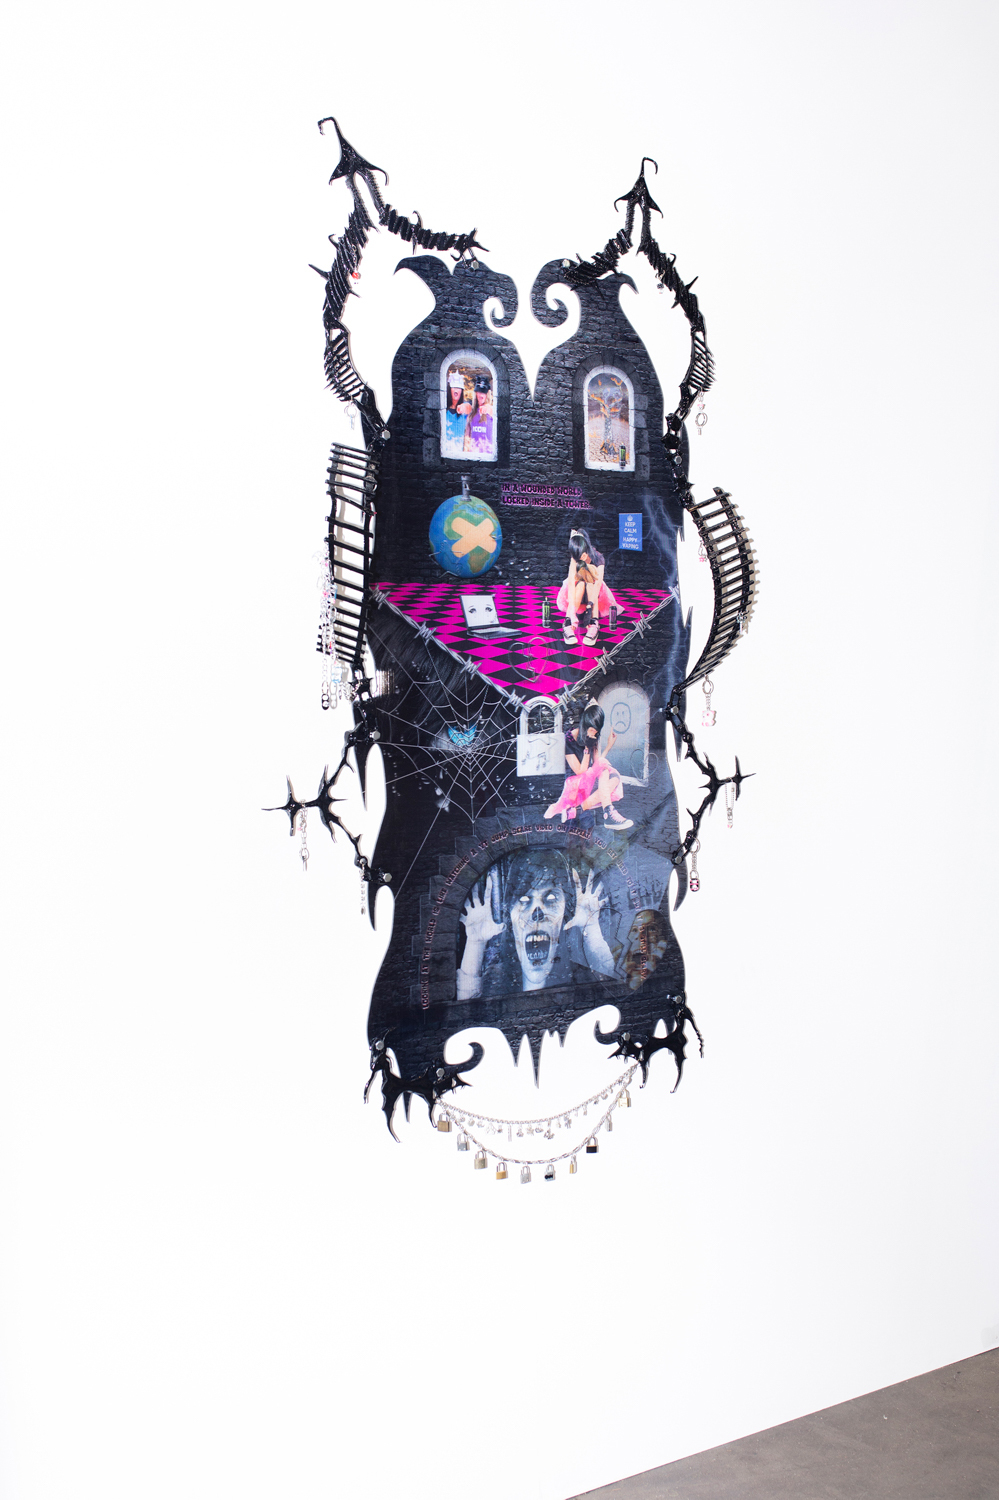 EMO </3 Tower, 2022, lenticular print, epoxy-coated ornaments and chains with beads